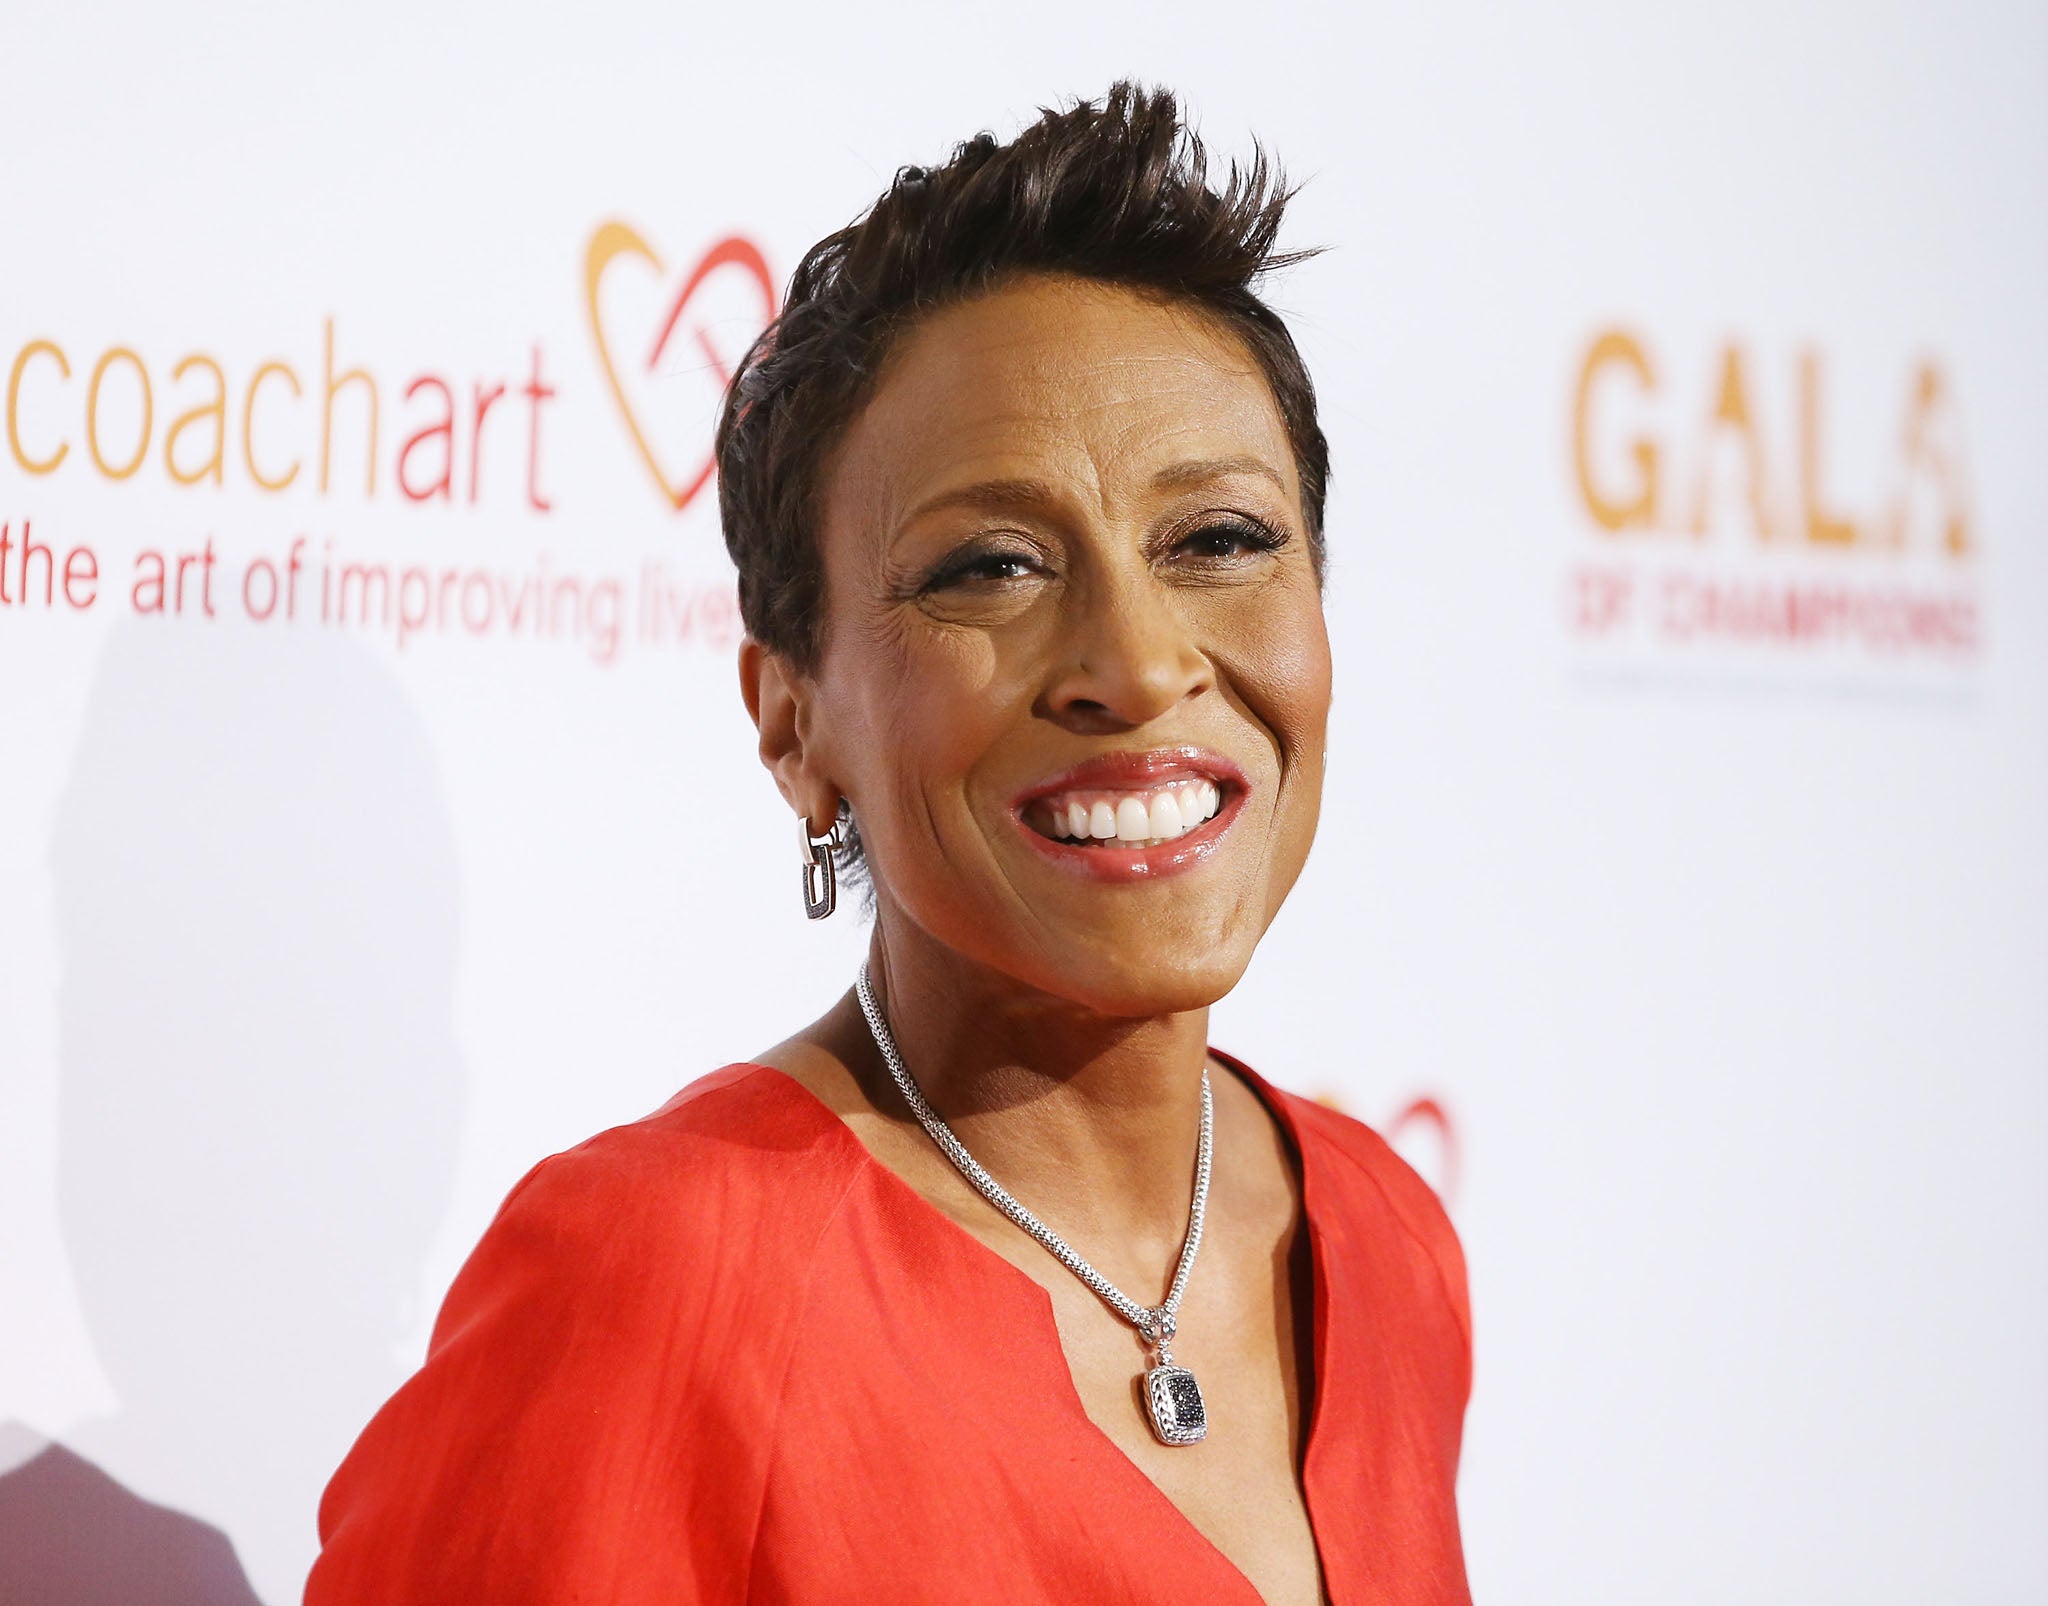 Robin Roberts, a news anchor on American TV show Good Morning America, came out as gay in a touching open letter thanking her “long-time girlfriend”.